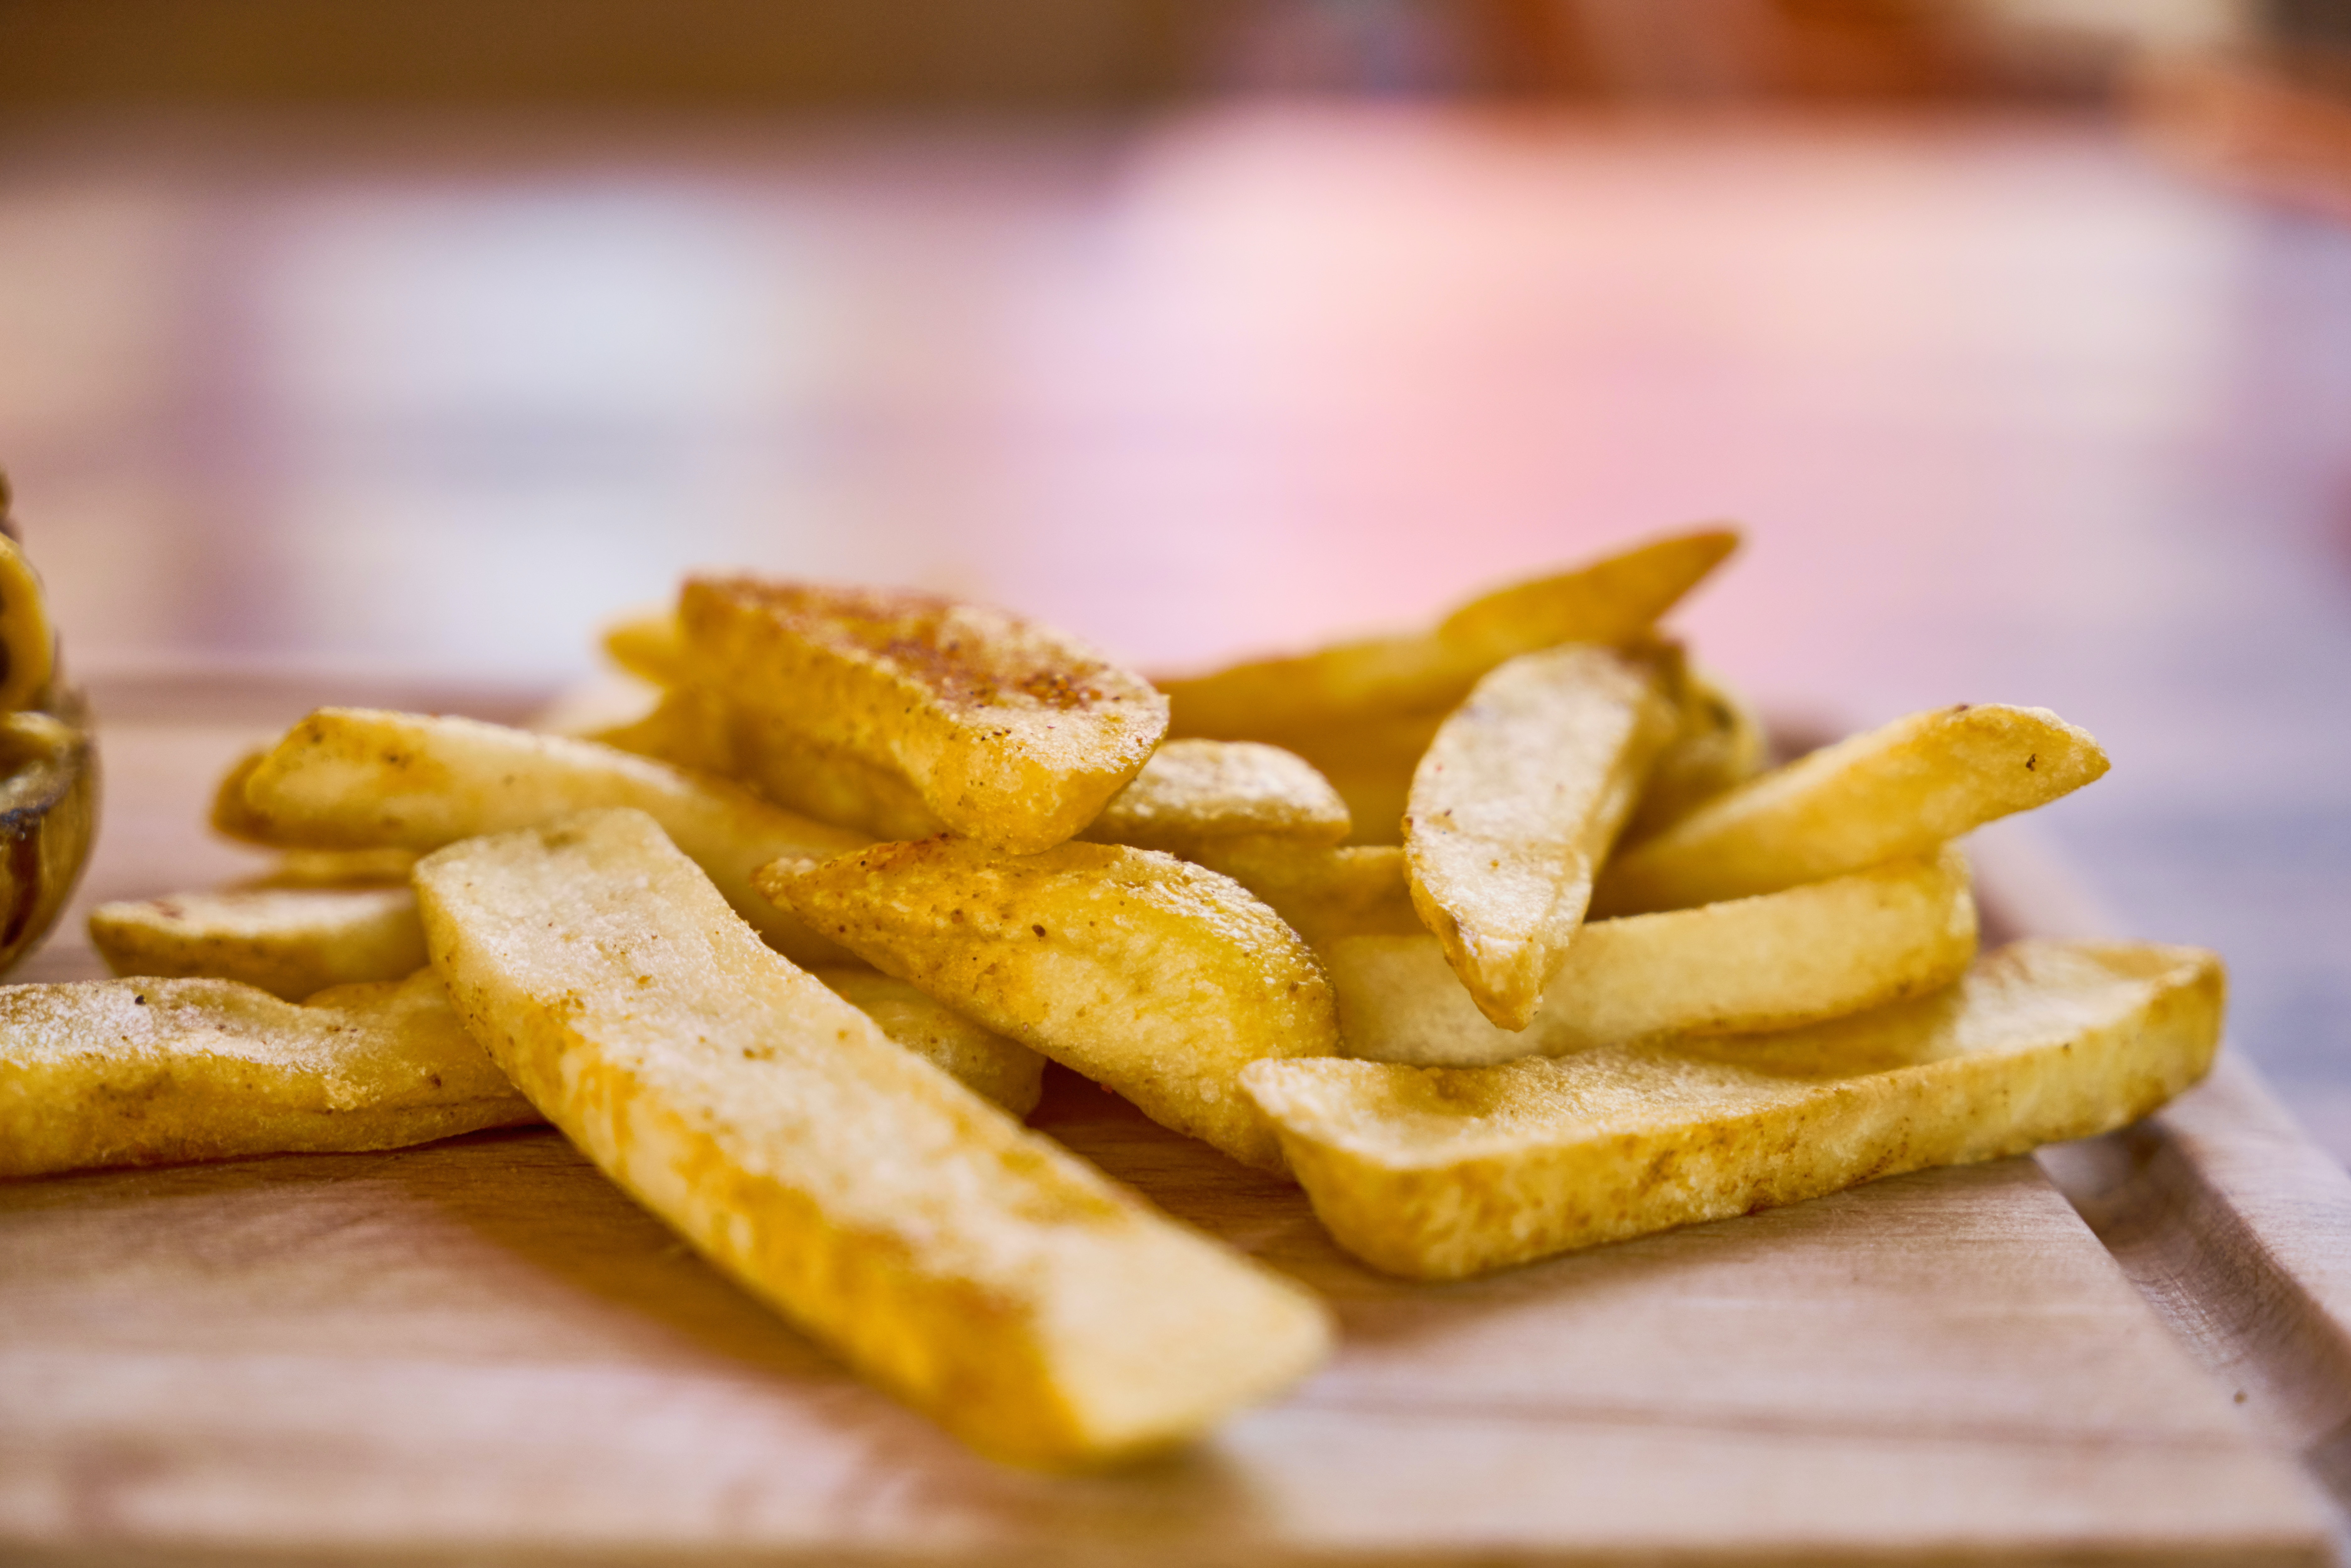 Angry Woman Allegedly Attempts To Run Over Partner For Snatching Her Fries